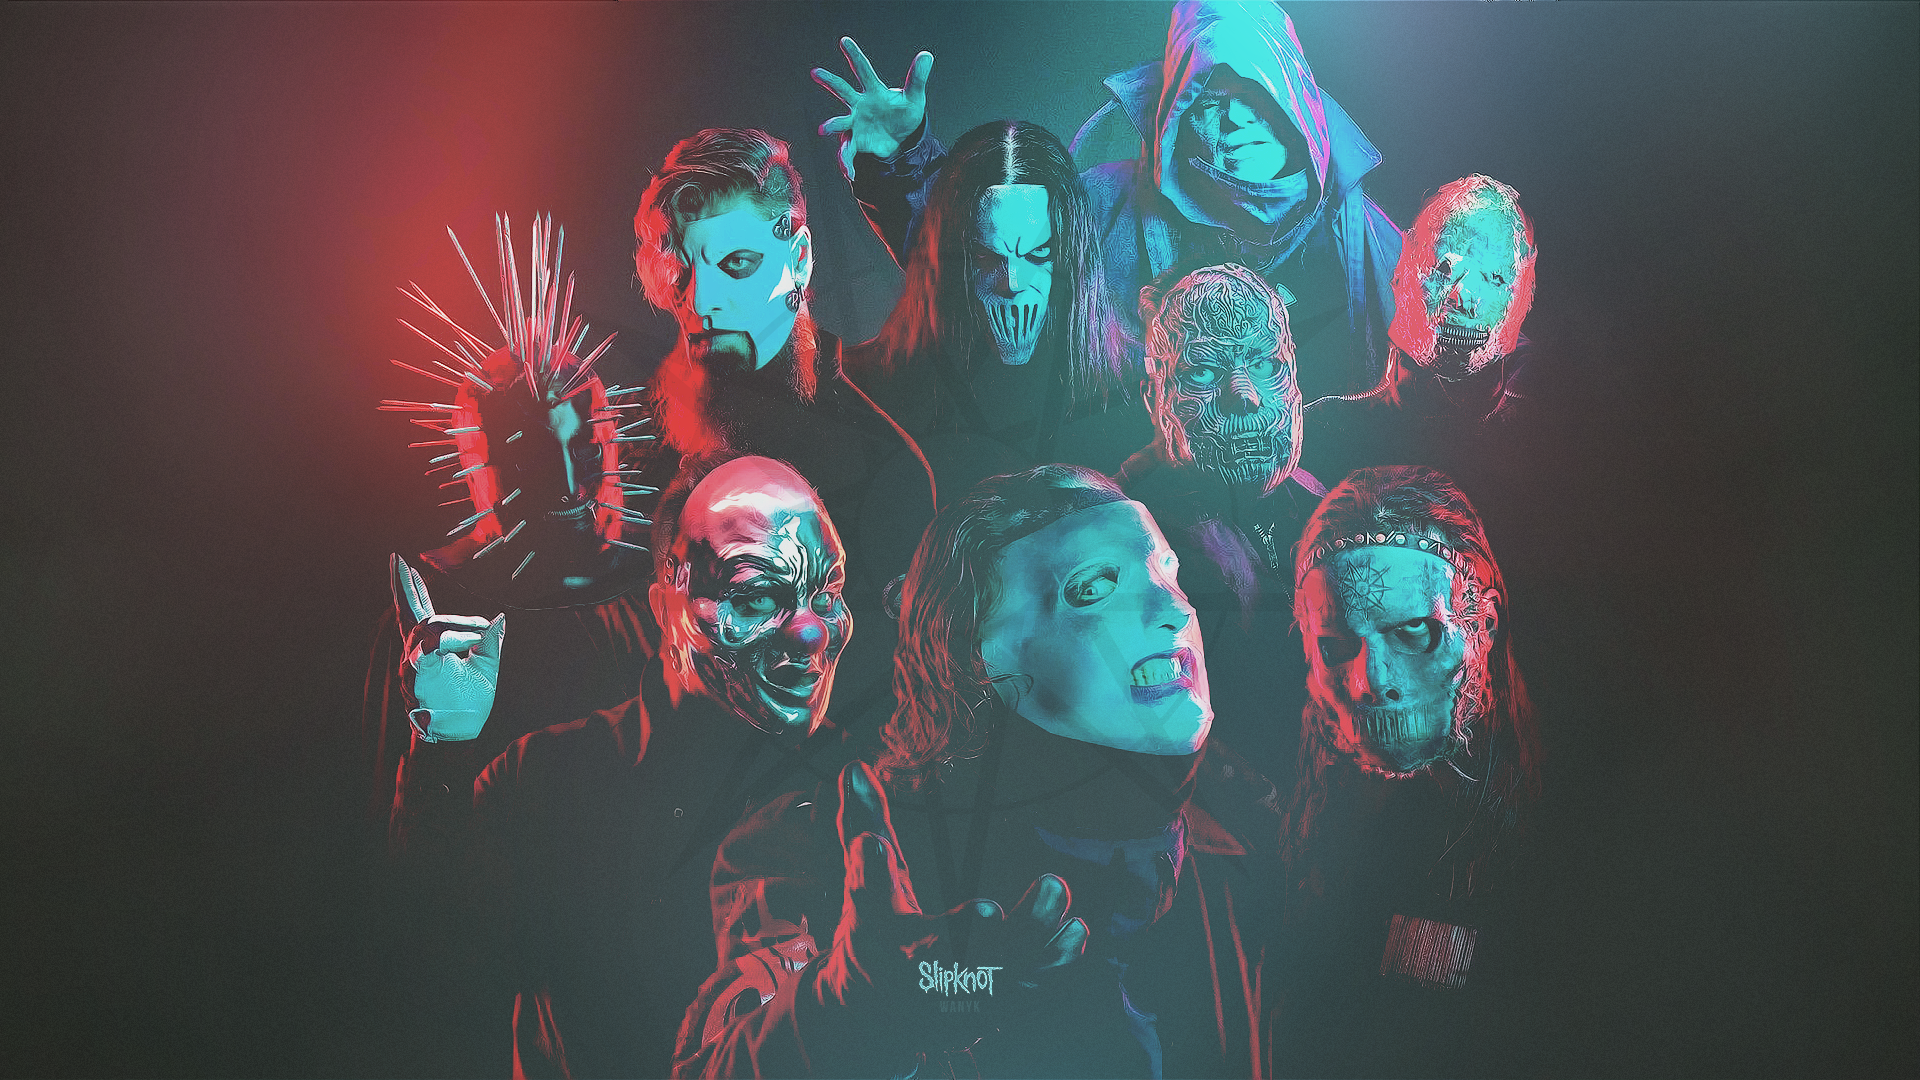 Slipknot, WANYK, We Are Not Your Kind, 2019